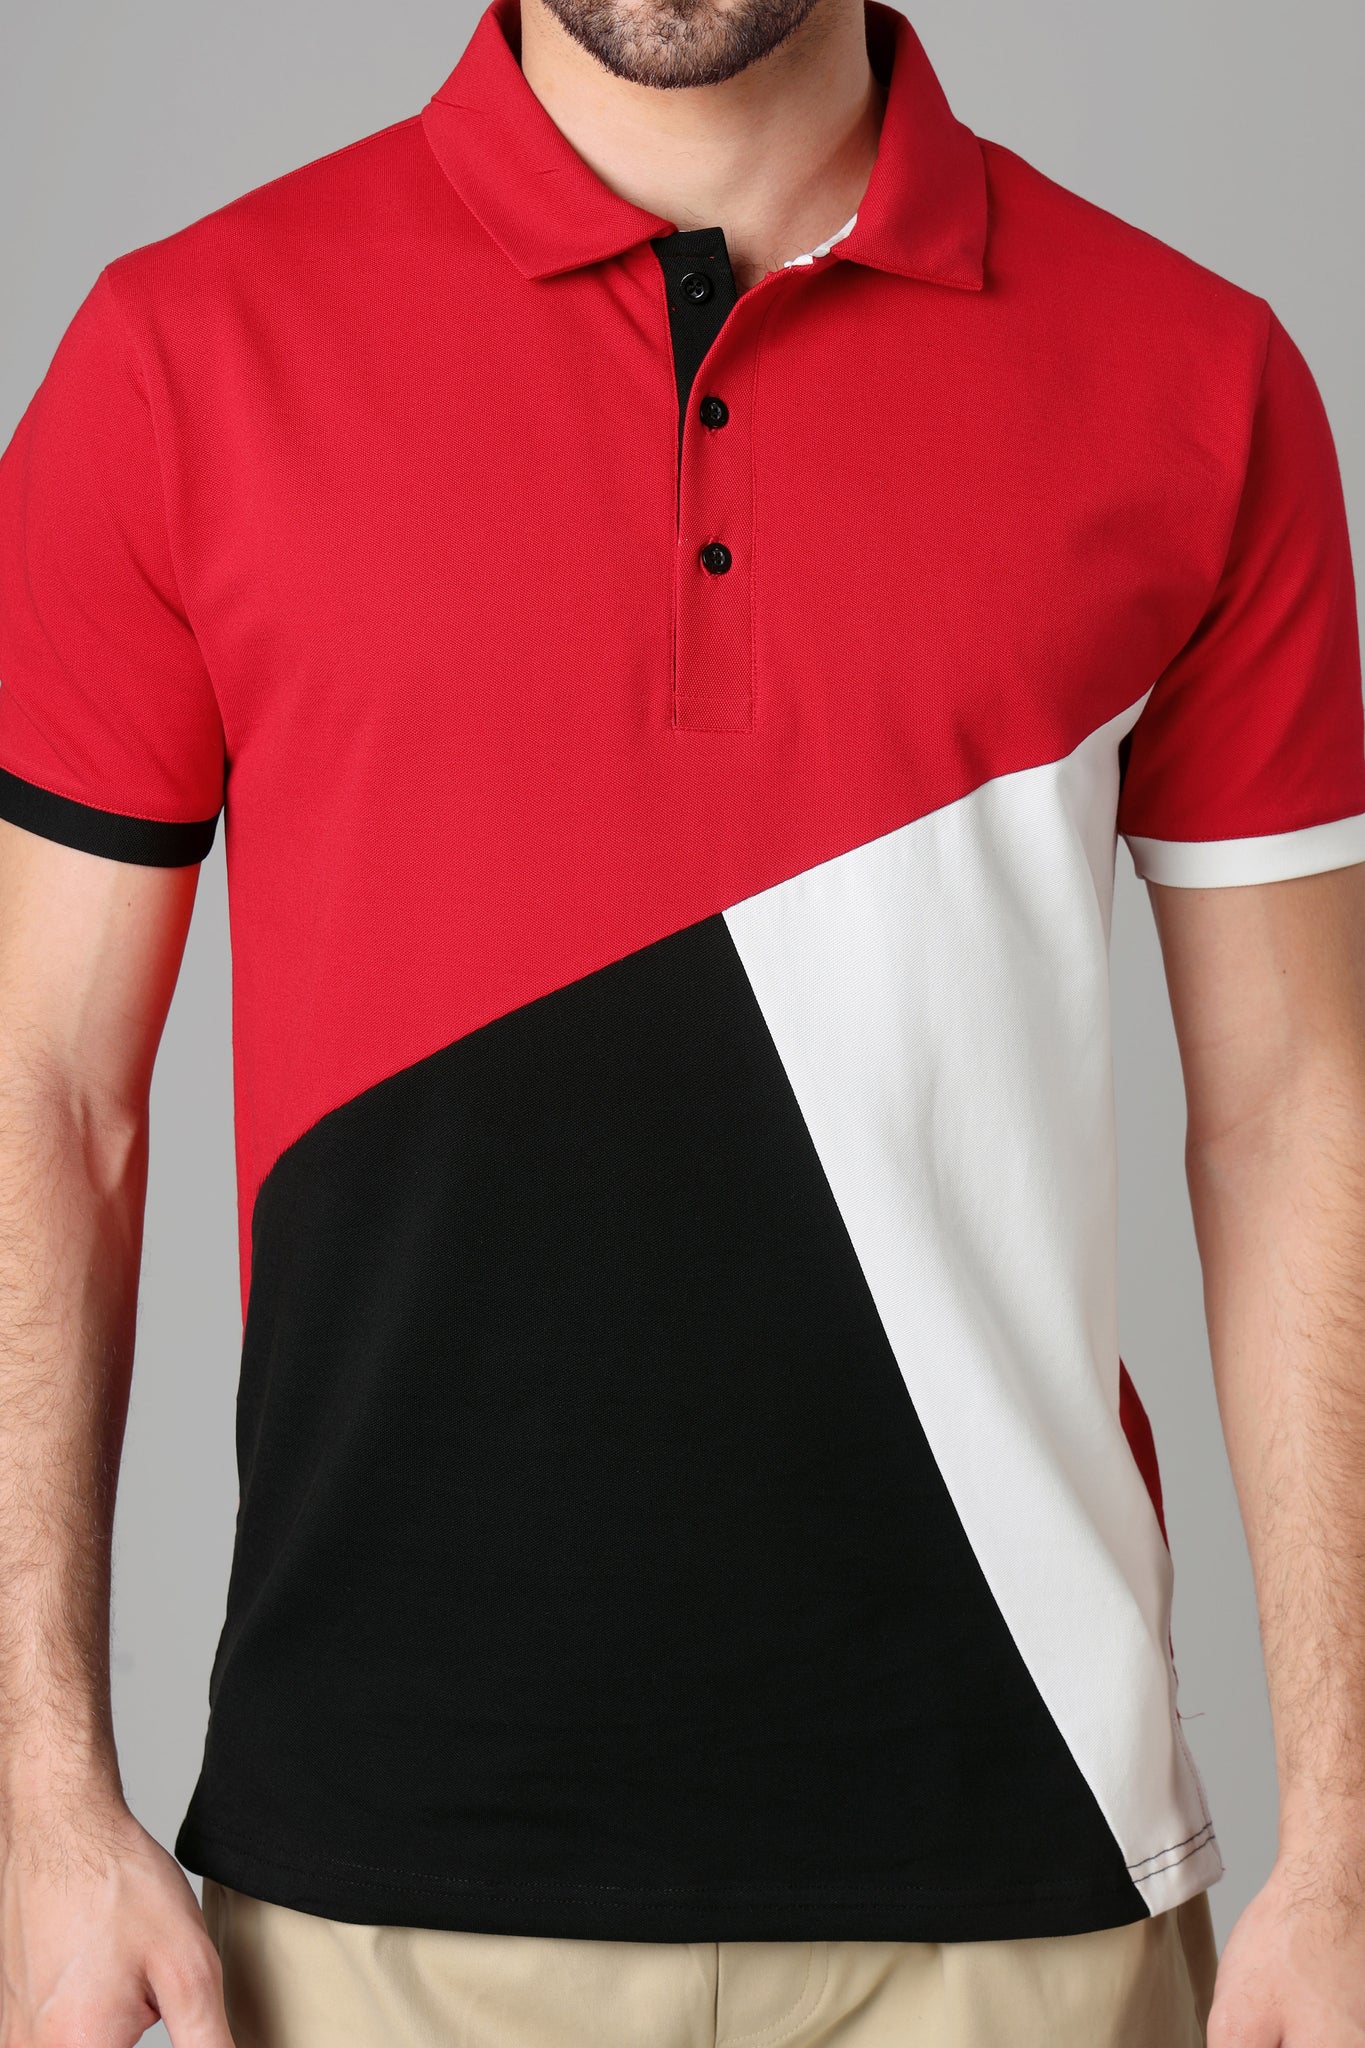 Exclusive Scarlet Red Smart Polo T-Shirt For Men